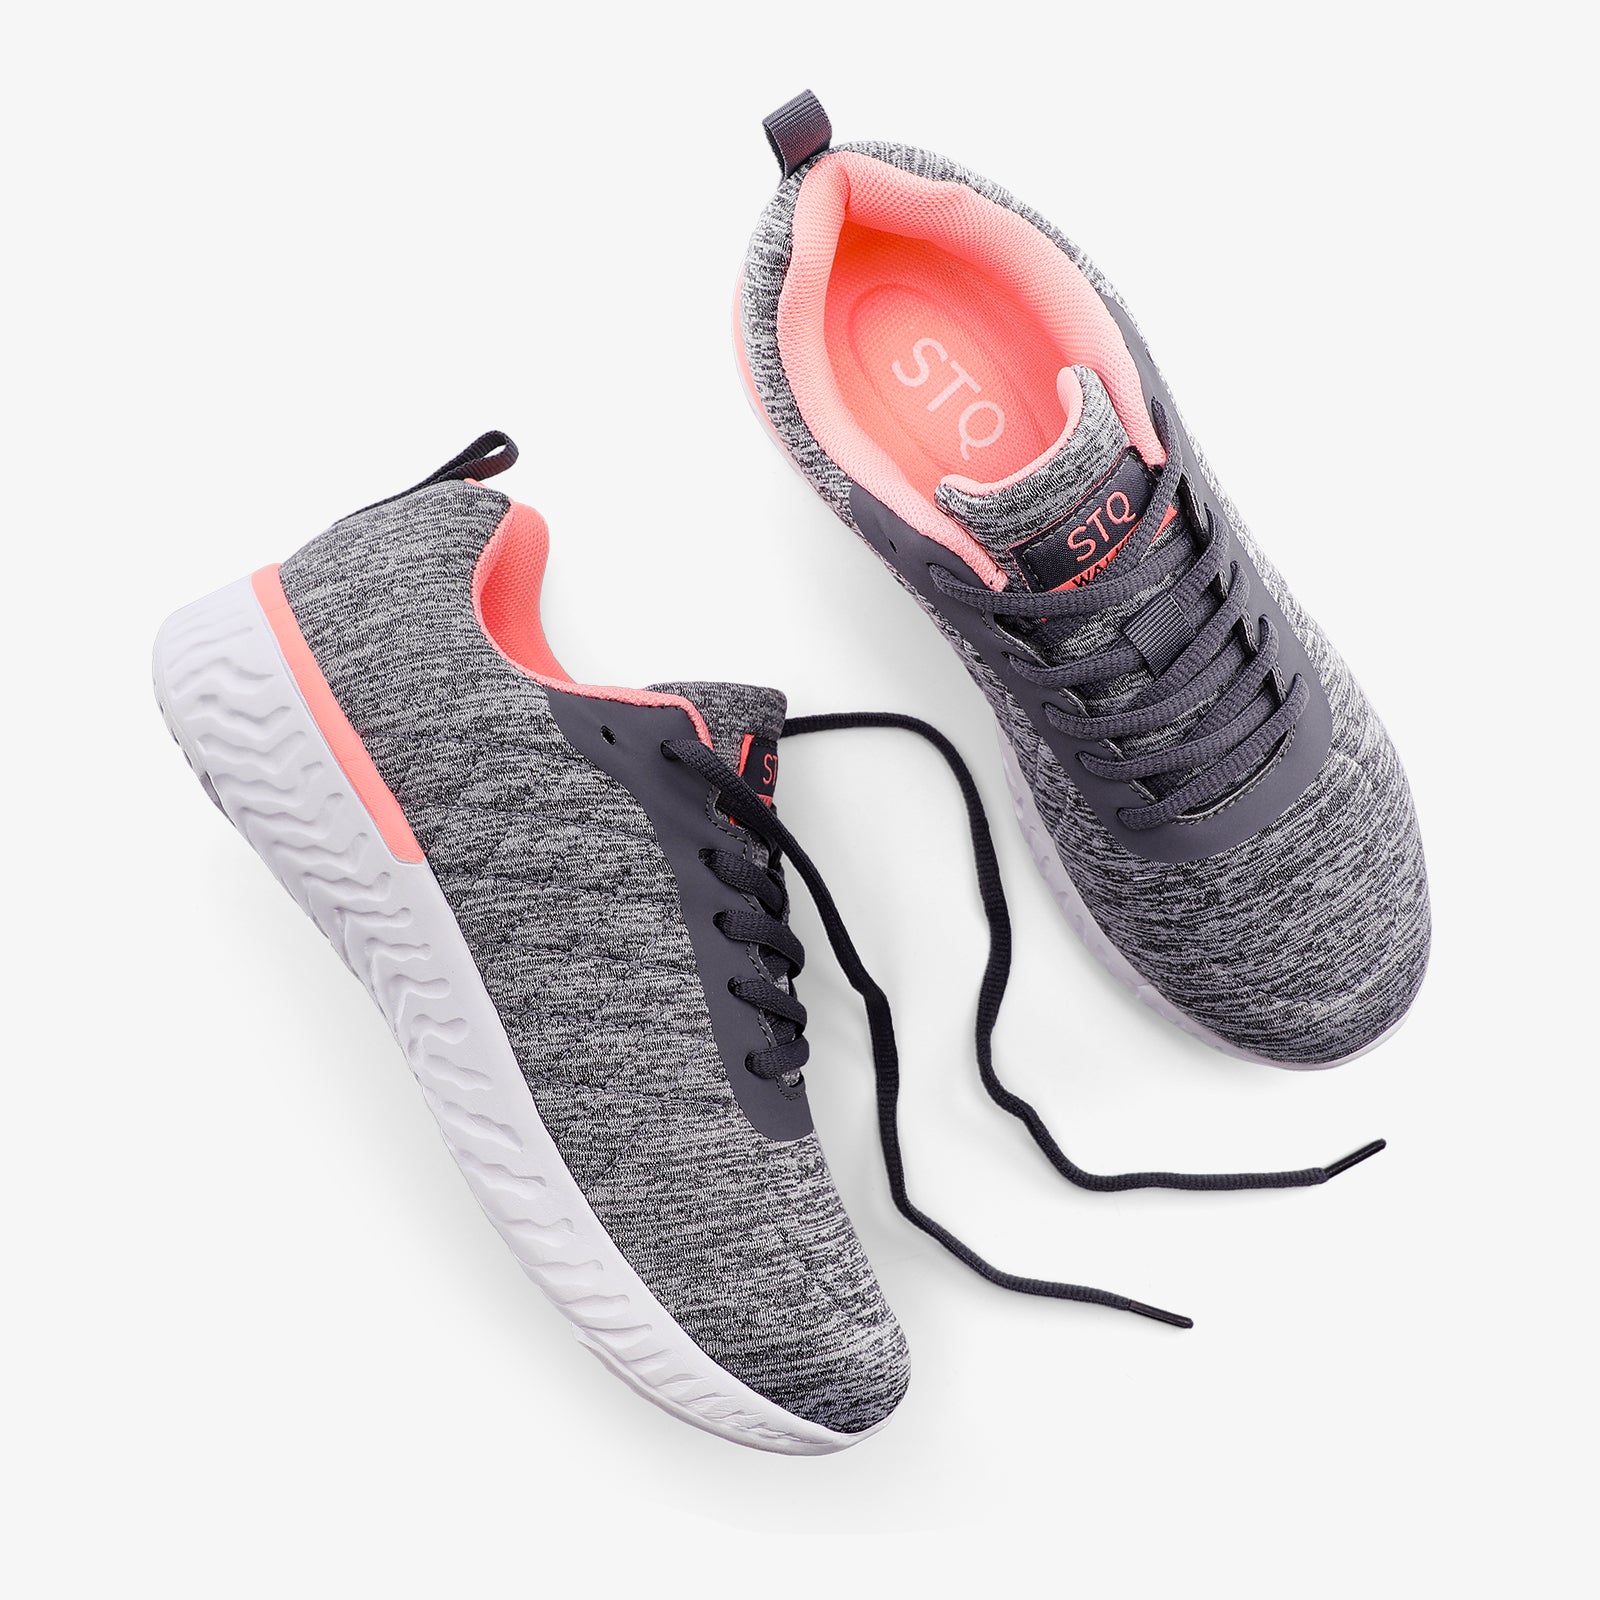 stq-lace-up-running-shoes-lightweight-sneakers-view